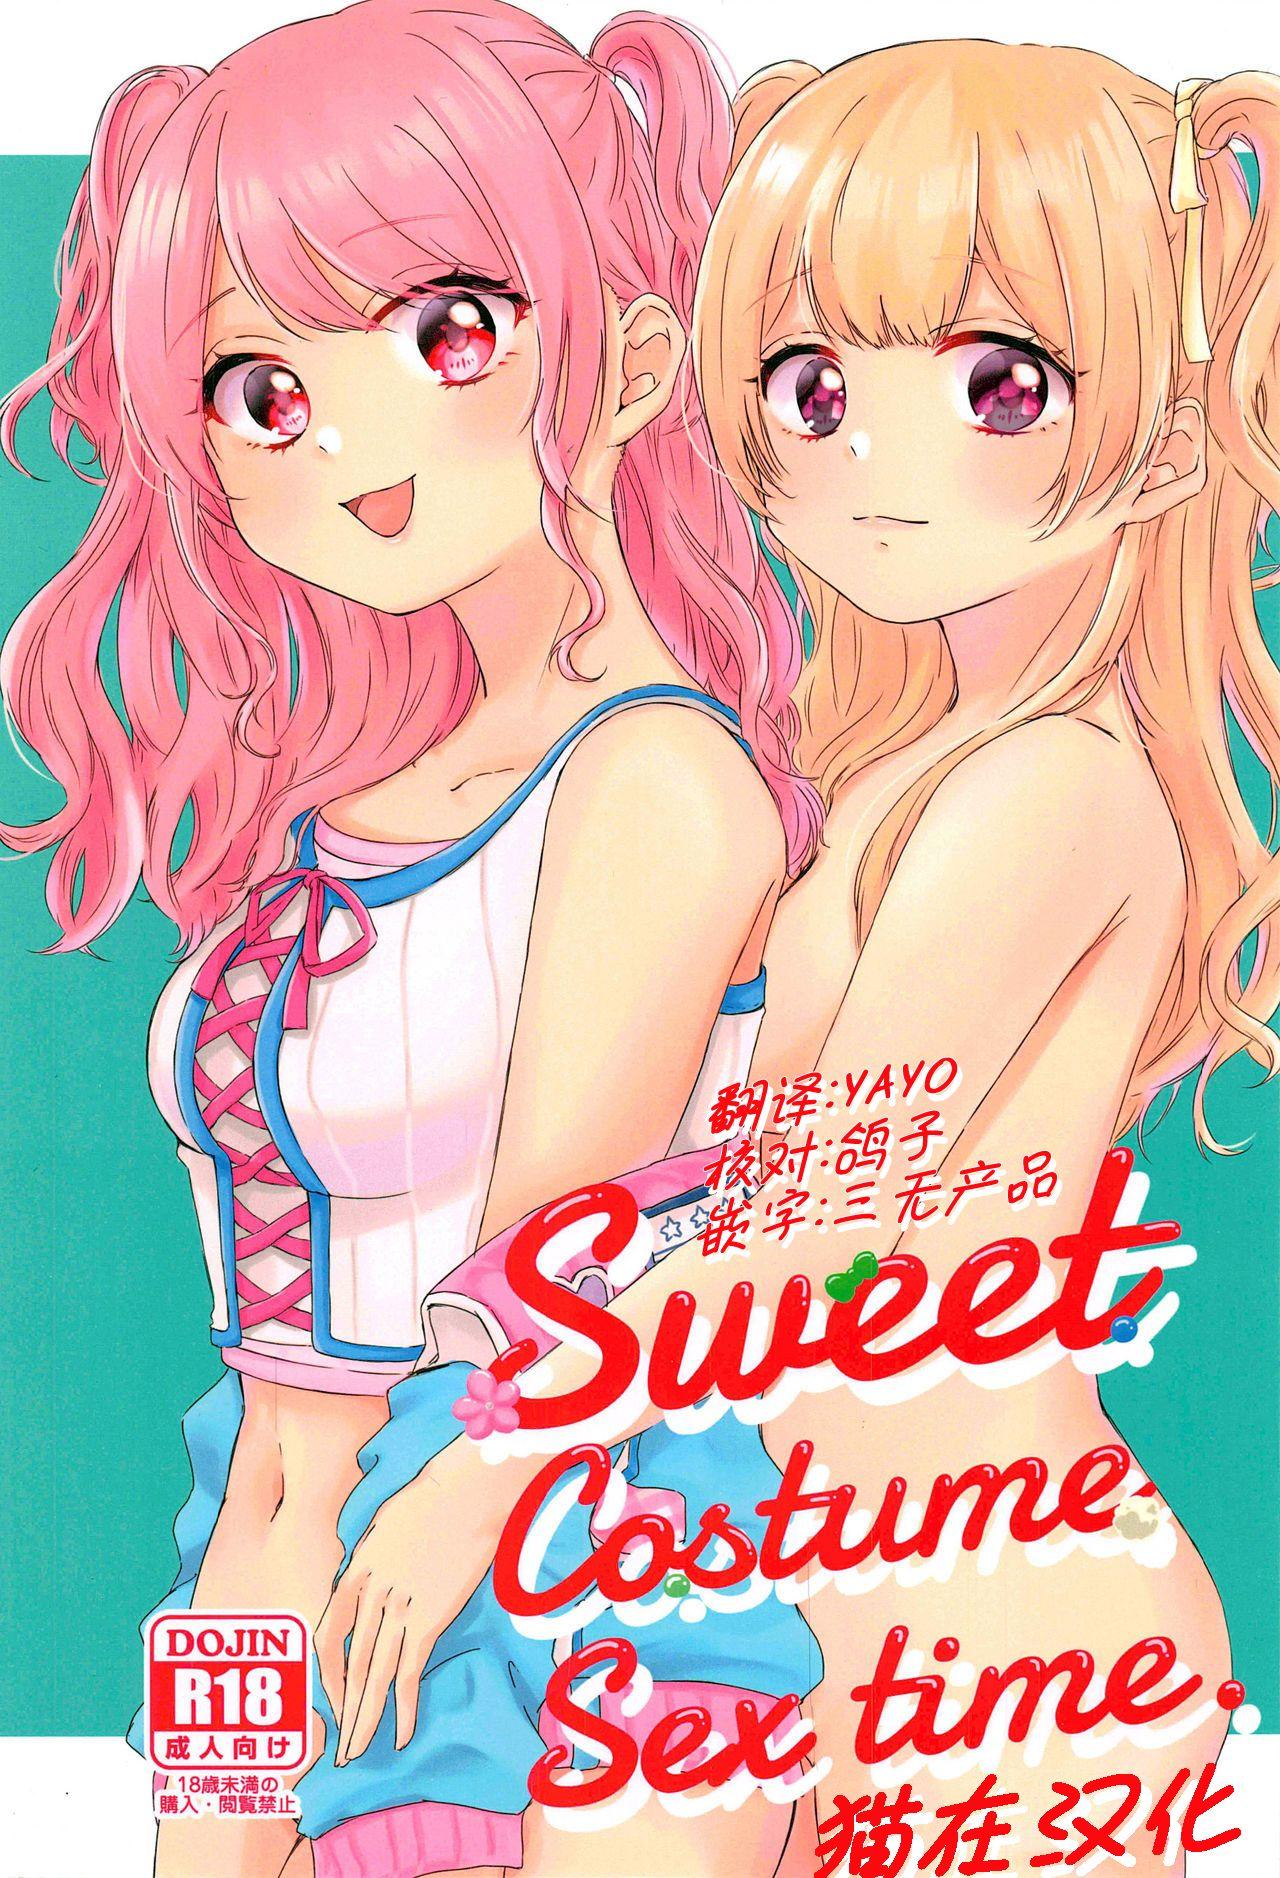 Model Sweet Costume Sex time. - Bang dream Sfm - Picture 1